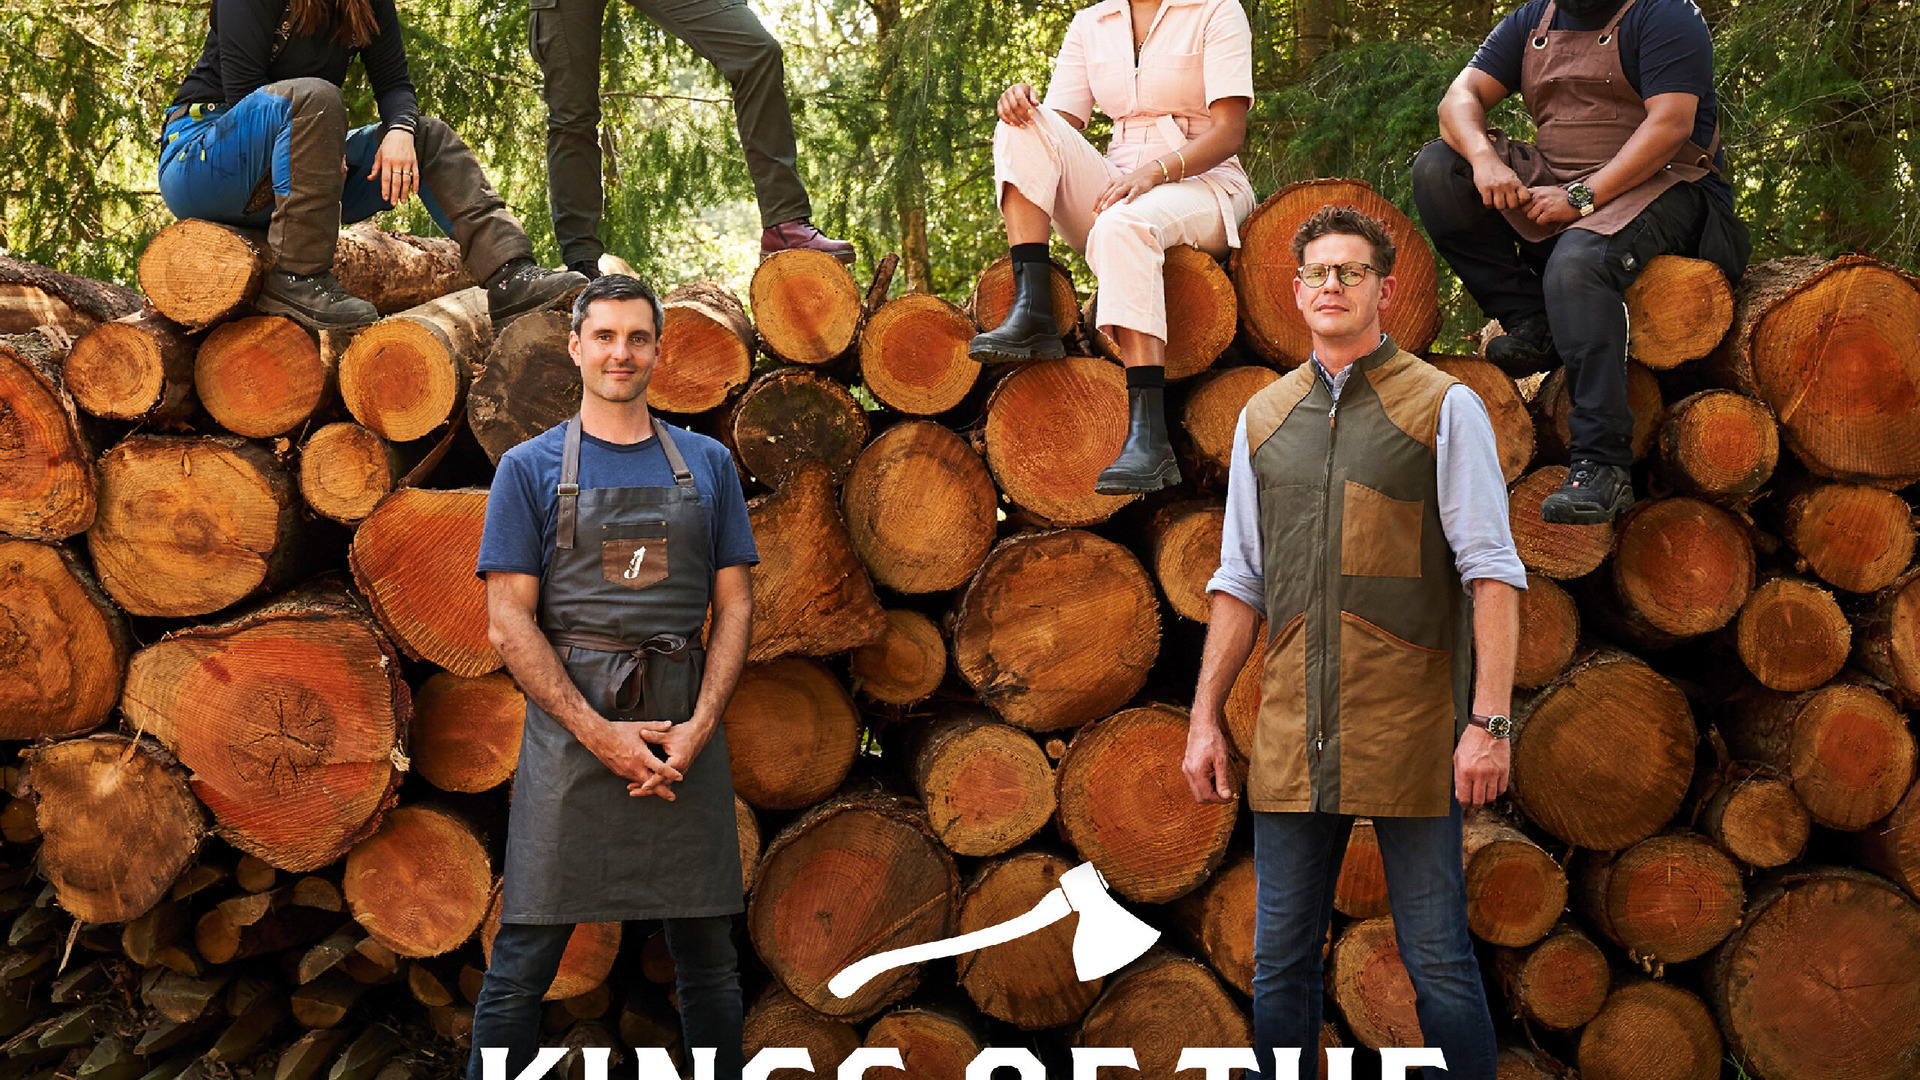 Show Kings of the Wood